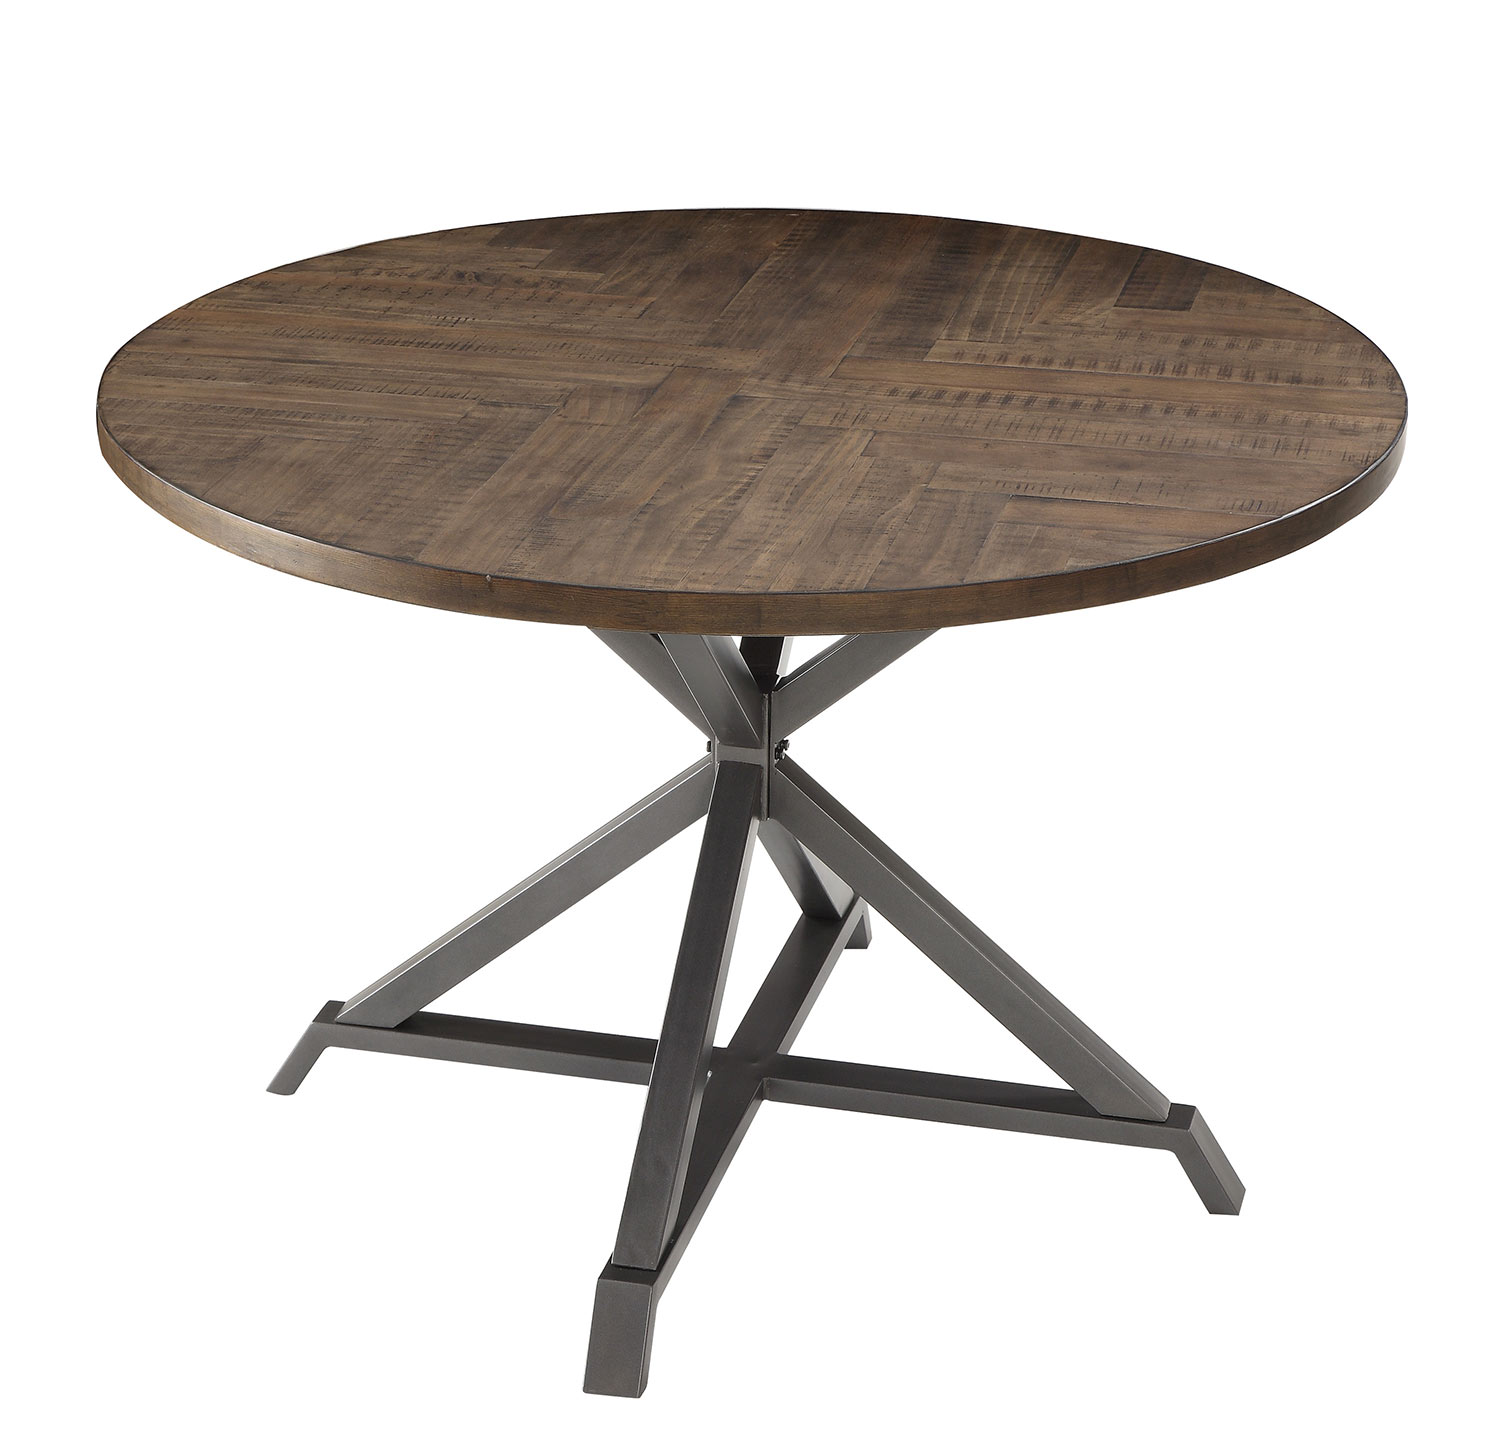 Homelegance Fideo Round Dining Table - Rustic - Gray Metal